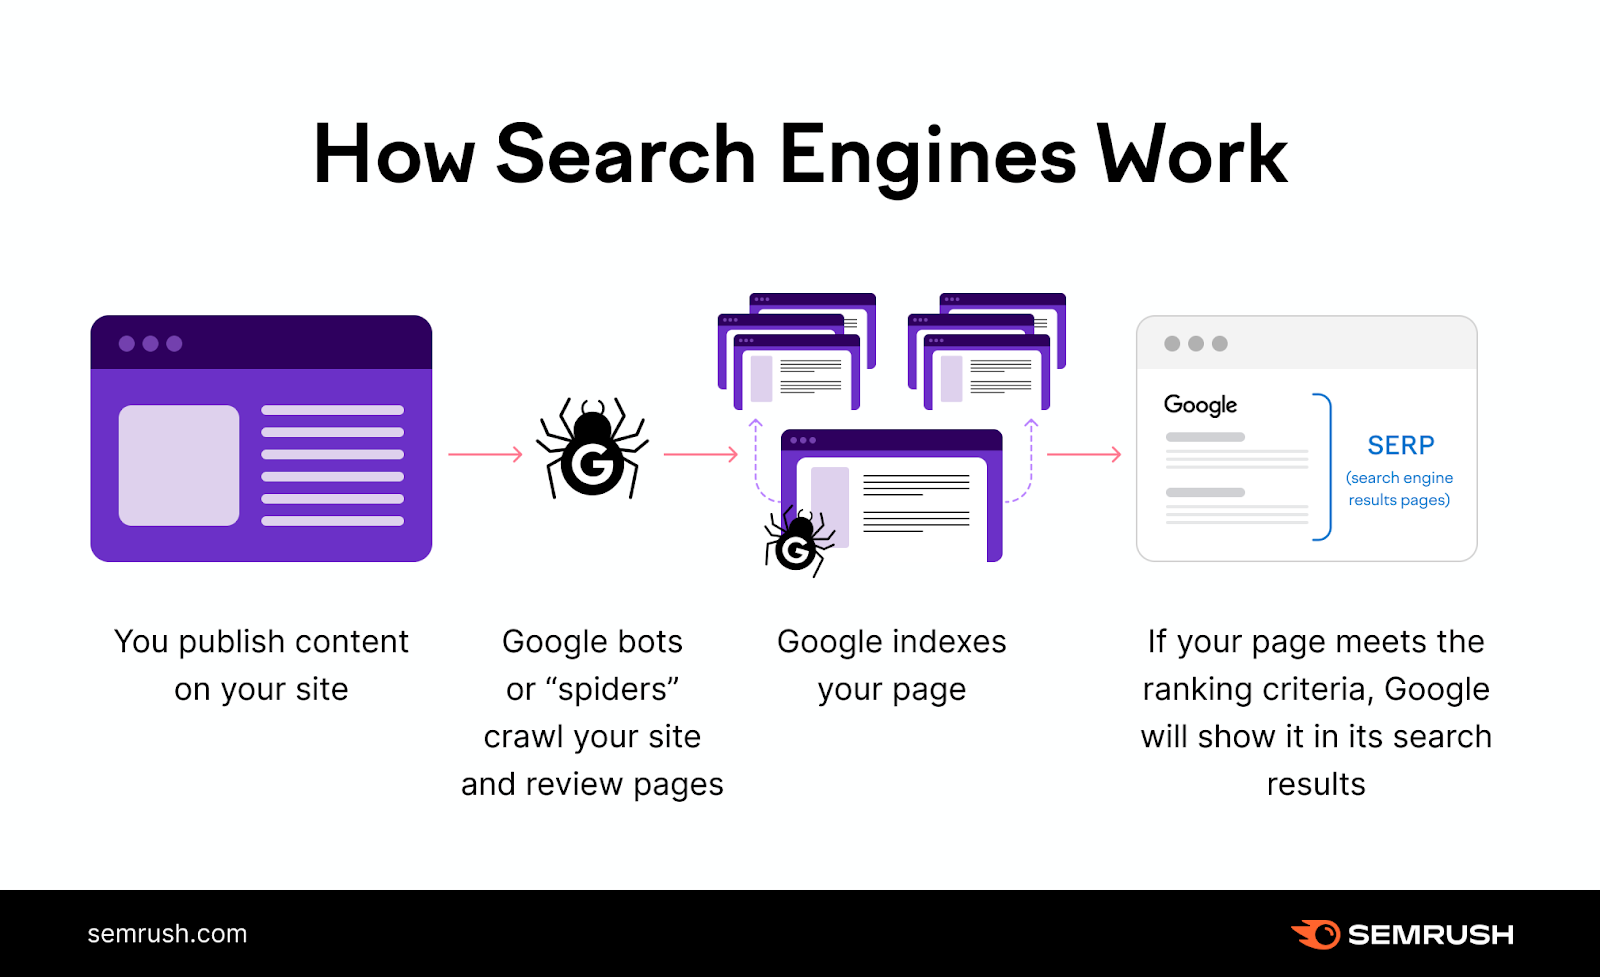 An infographic s،wing ،w search engines work